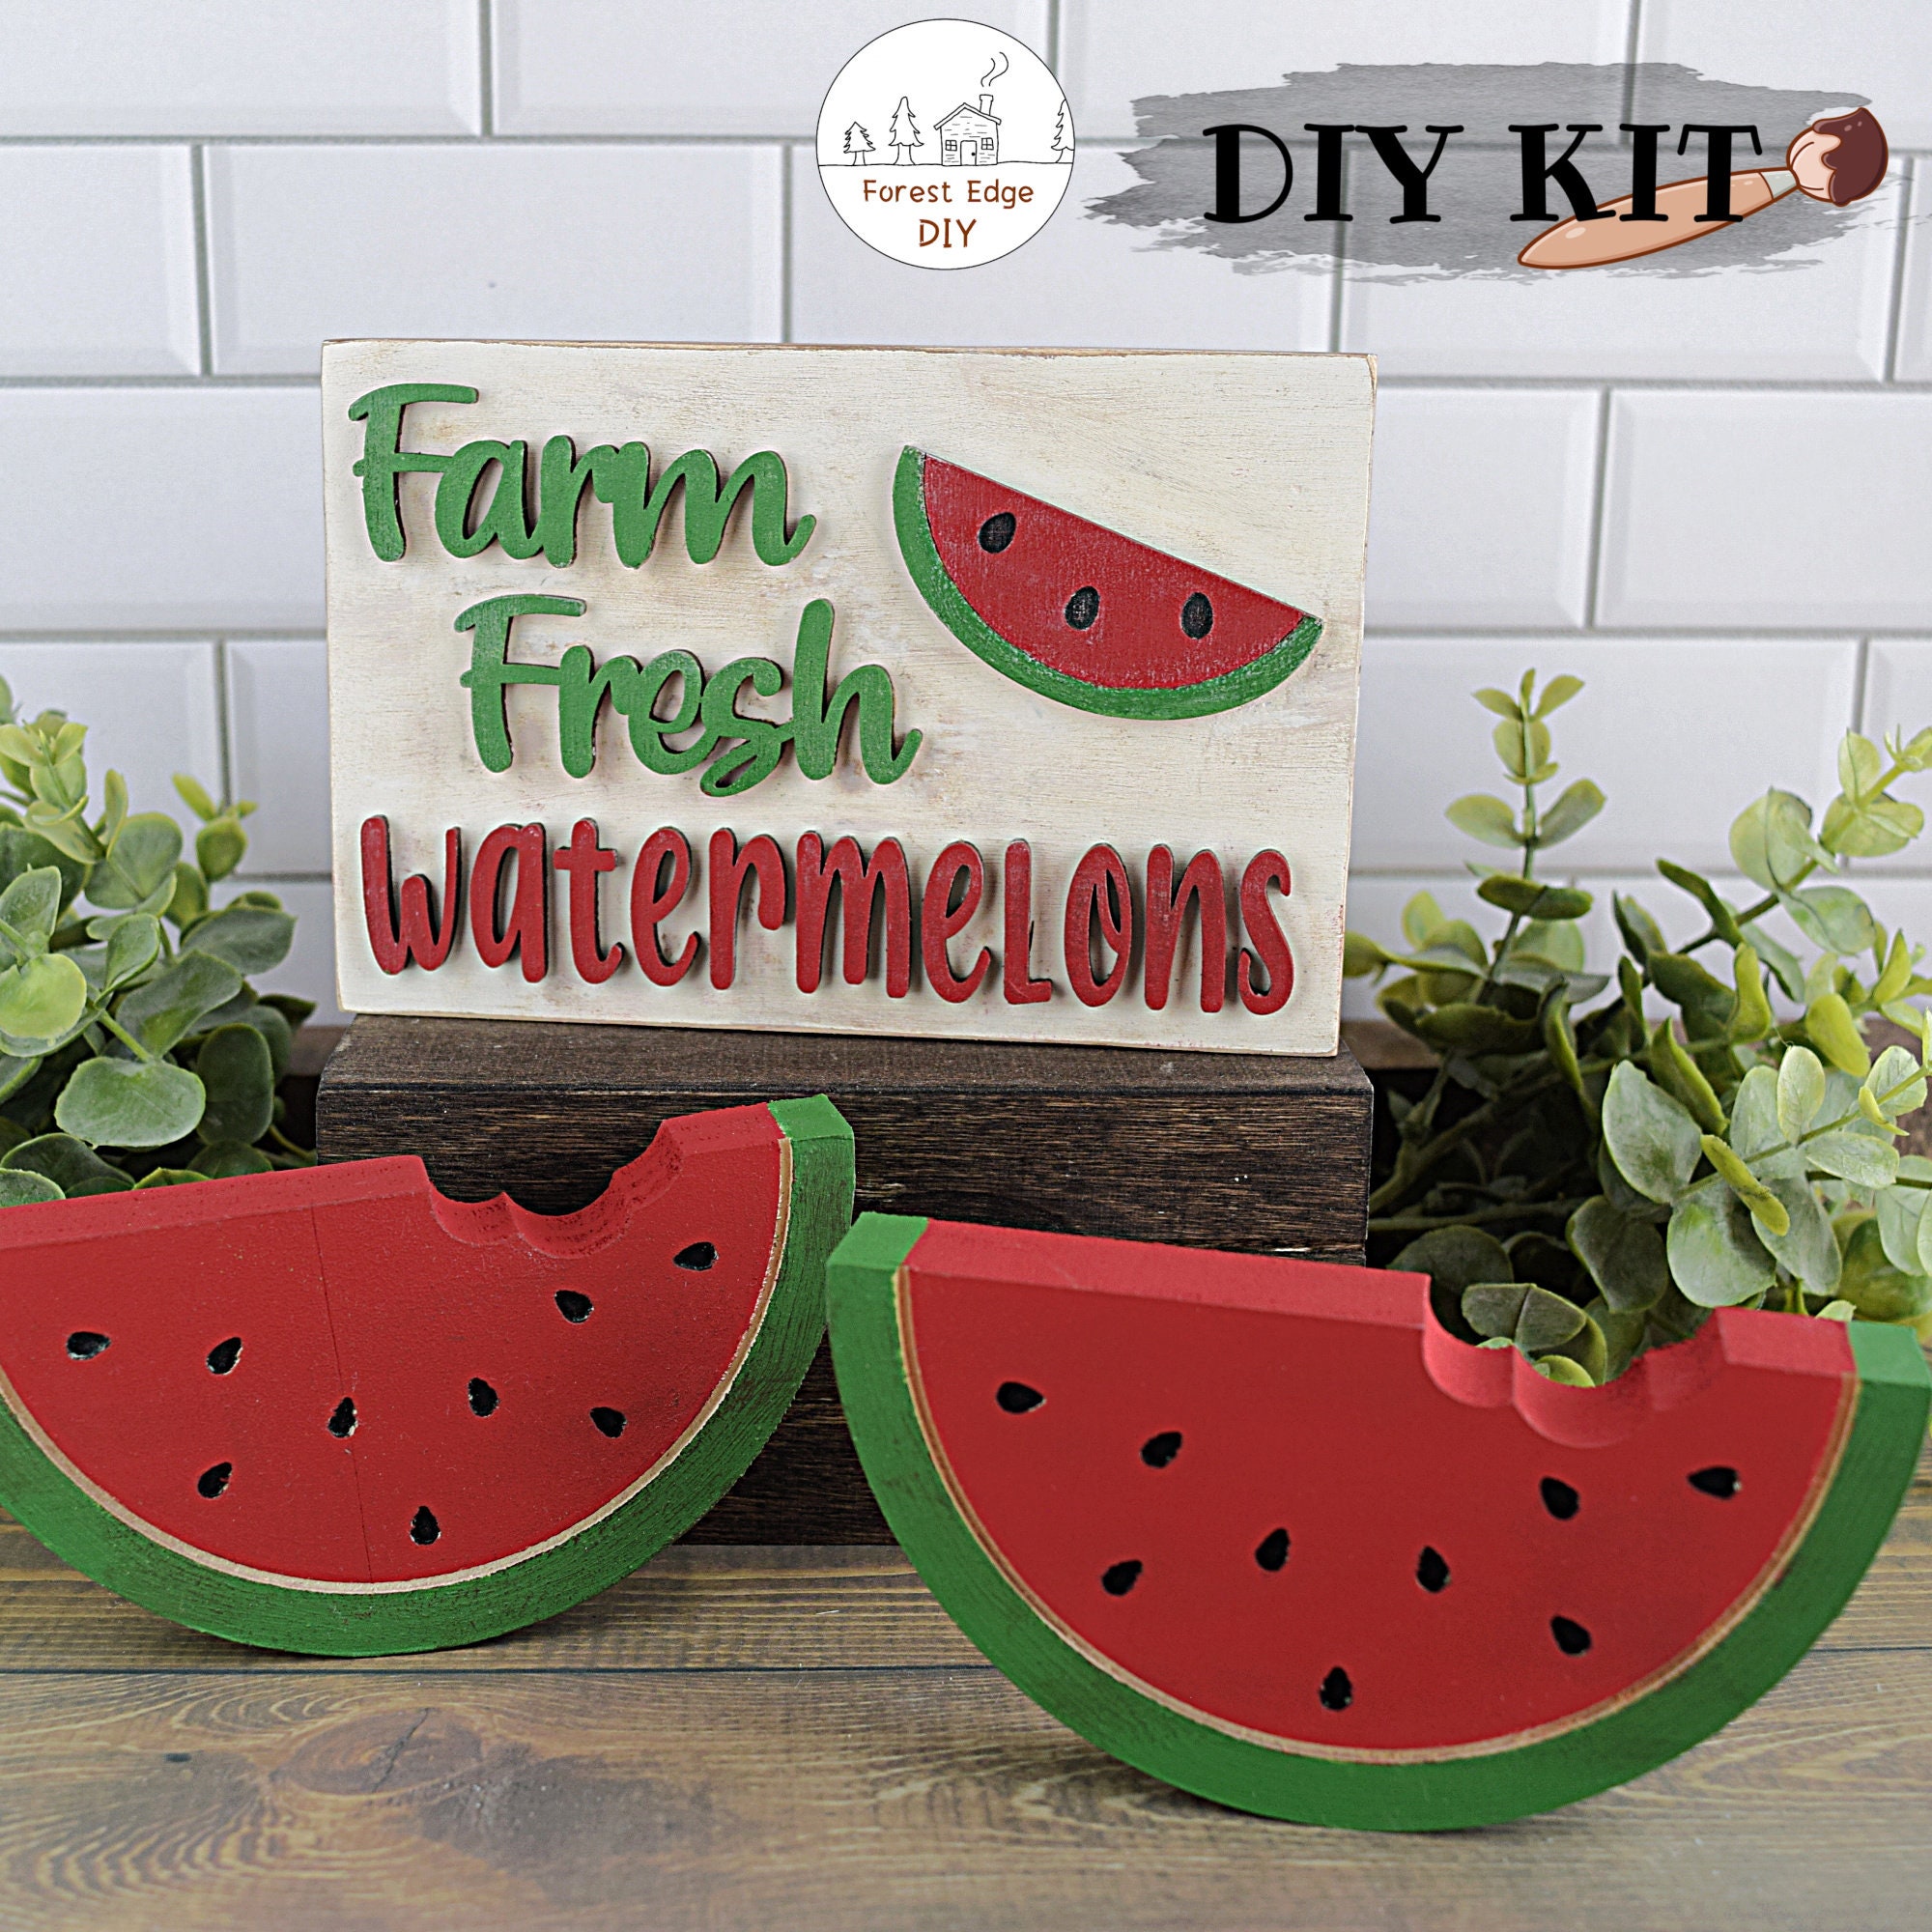 Wood Canvas Painting Watermelon Craft Kit for Kids DIY Kit Home Activity  Craft Supplies 